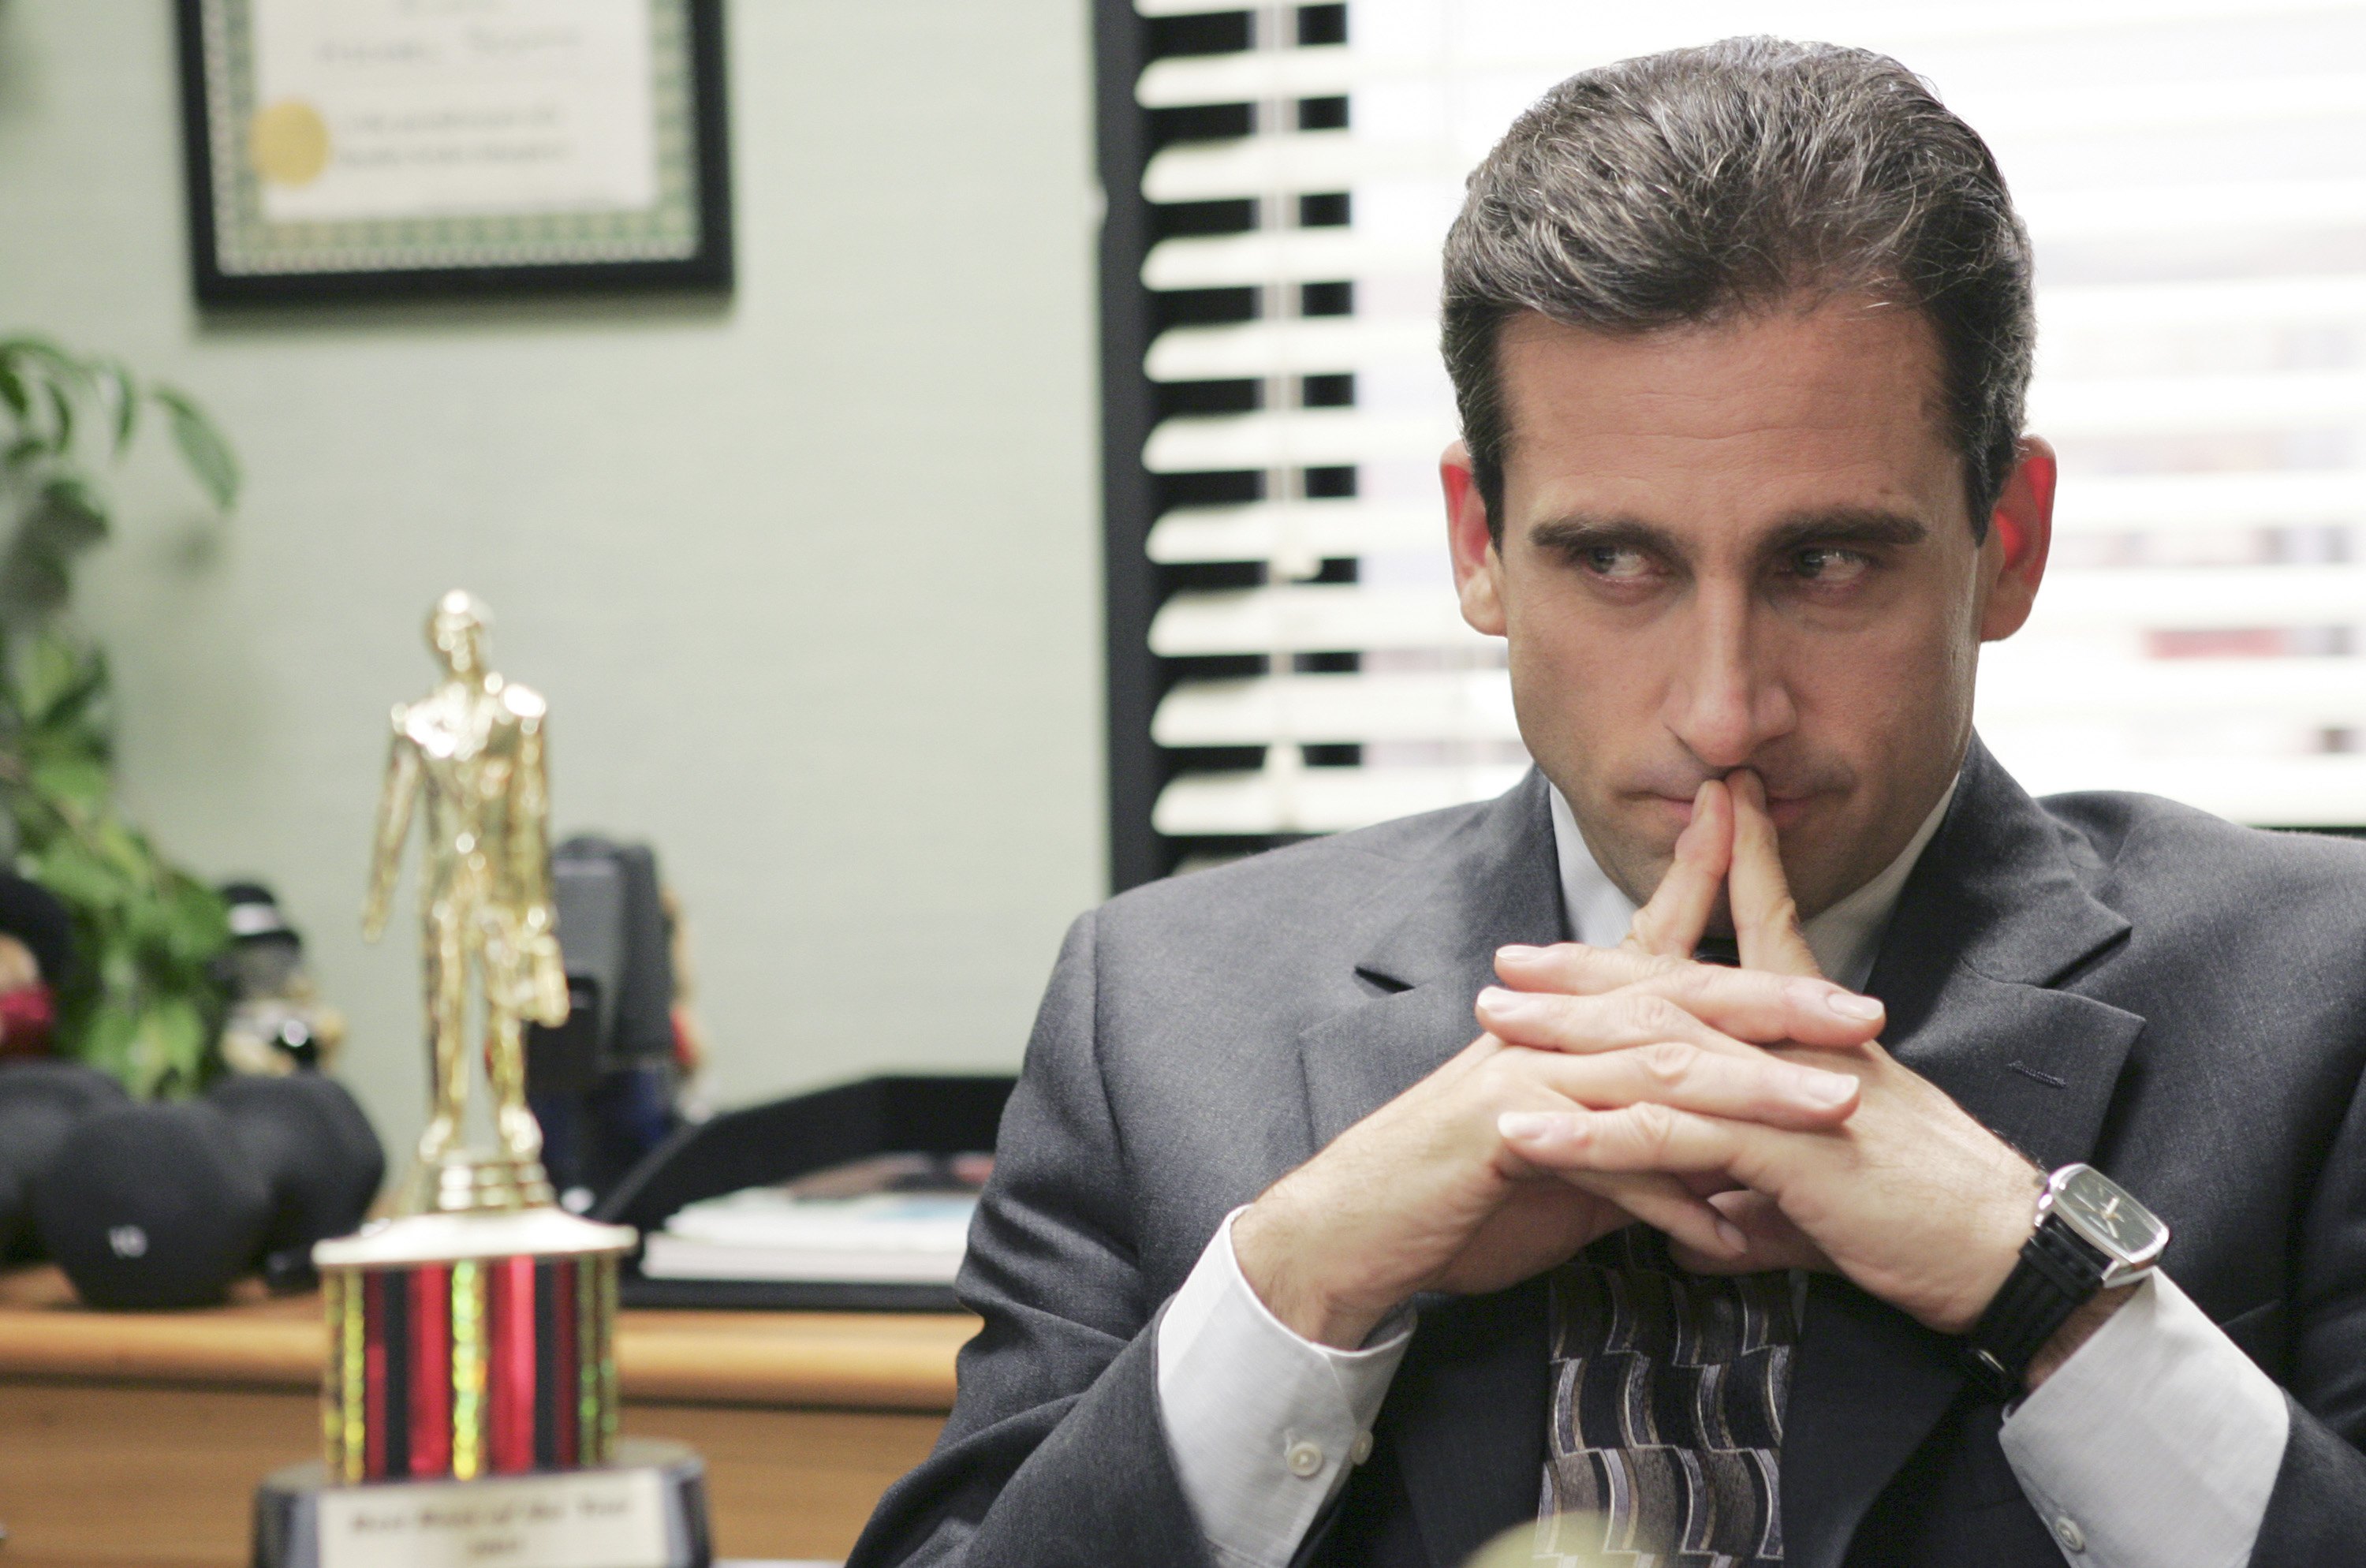 The Office': The Show's Highest-Rated Episodes Share 1 Distinction